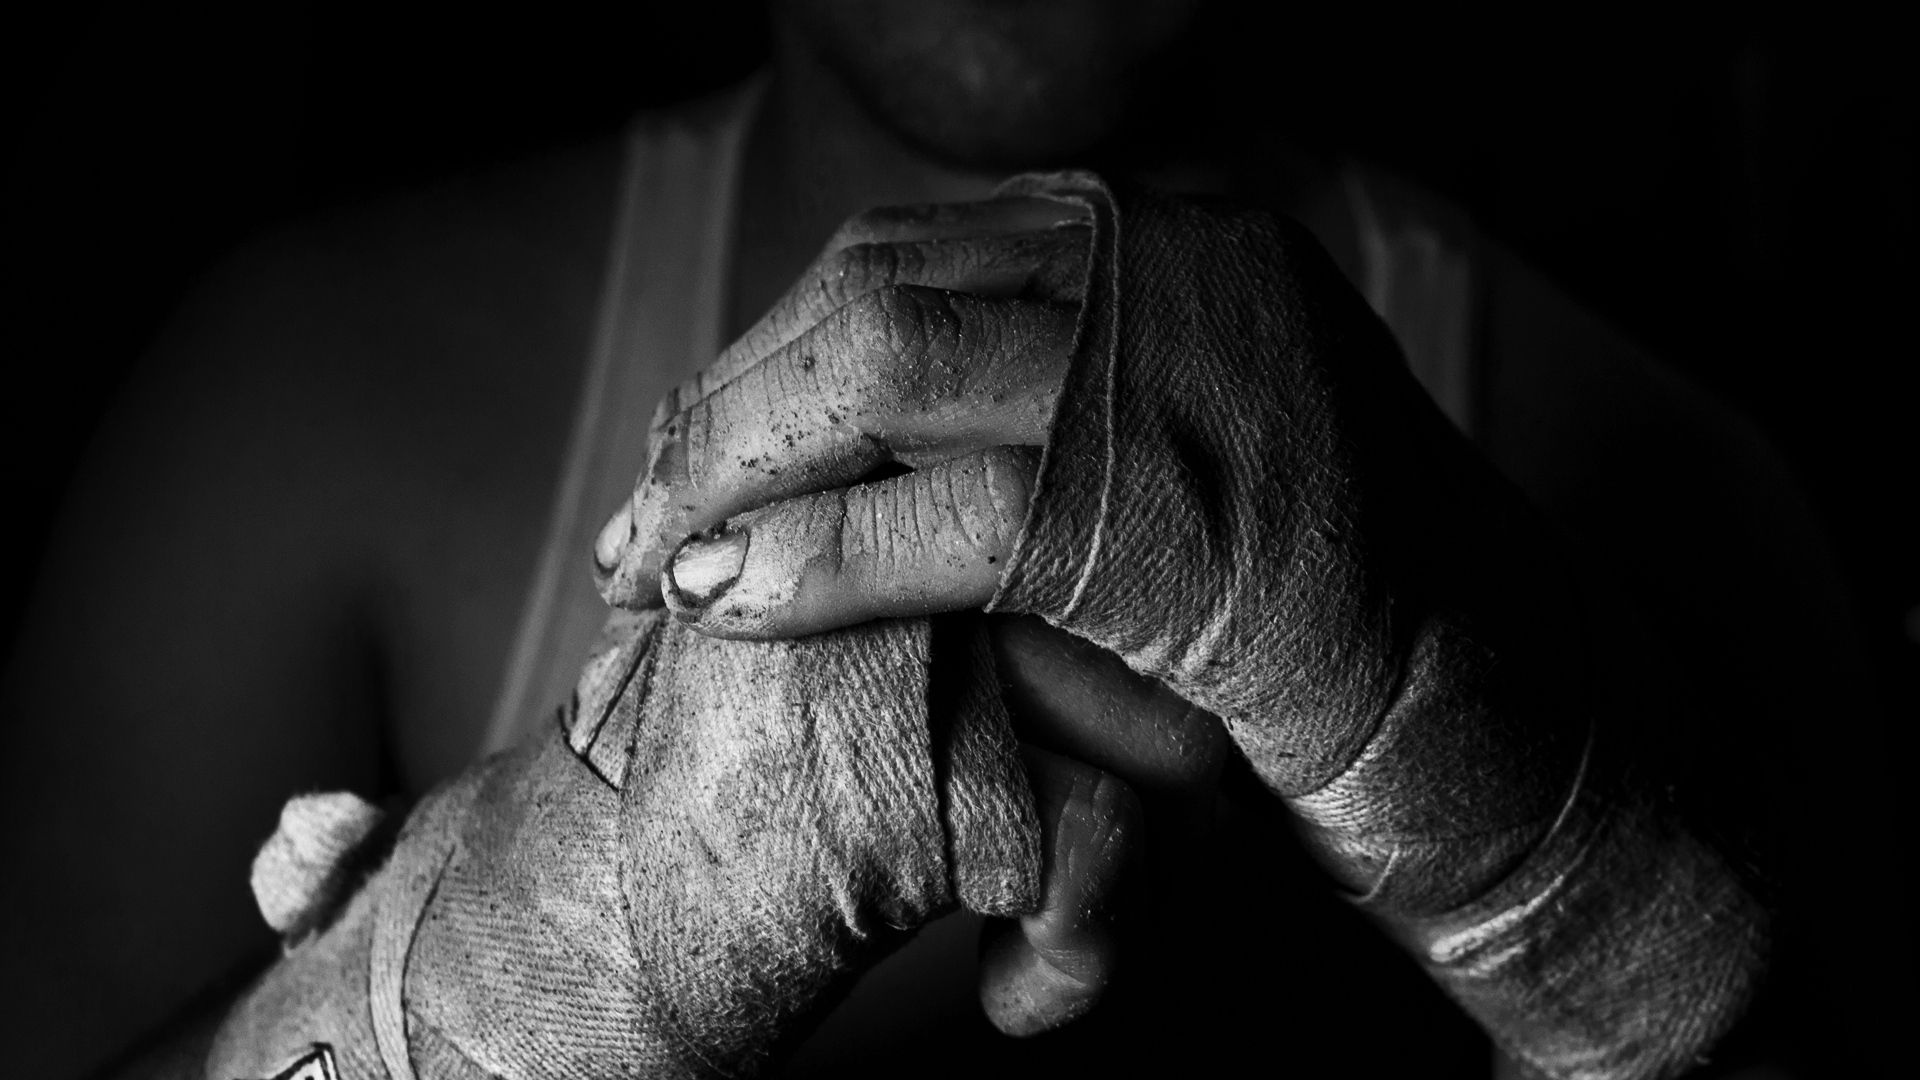 chb, sports, hands, bw, fighter, bandages Full HD